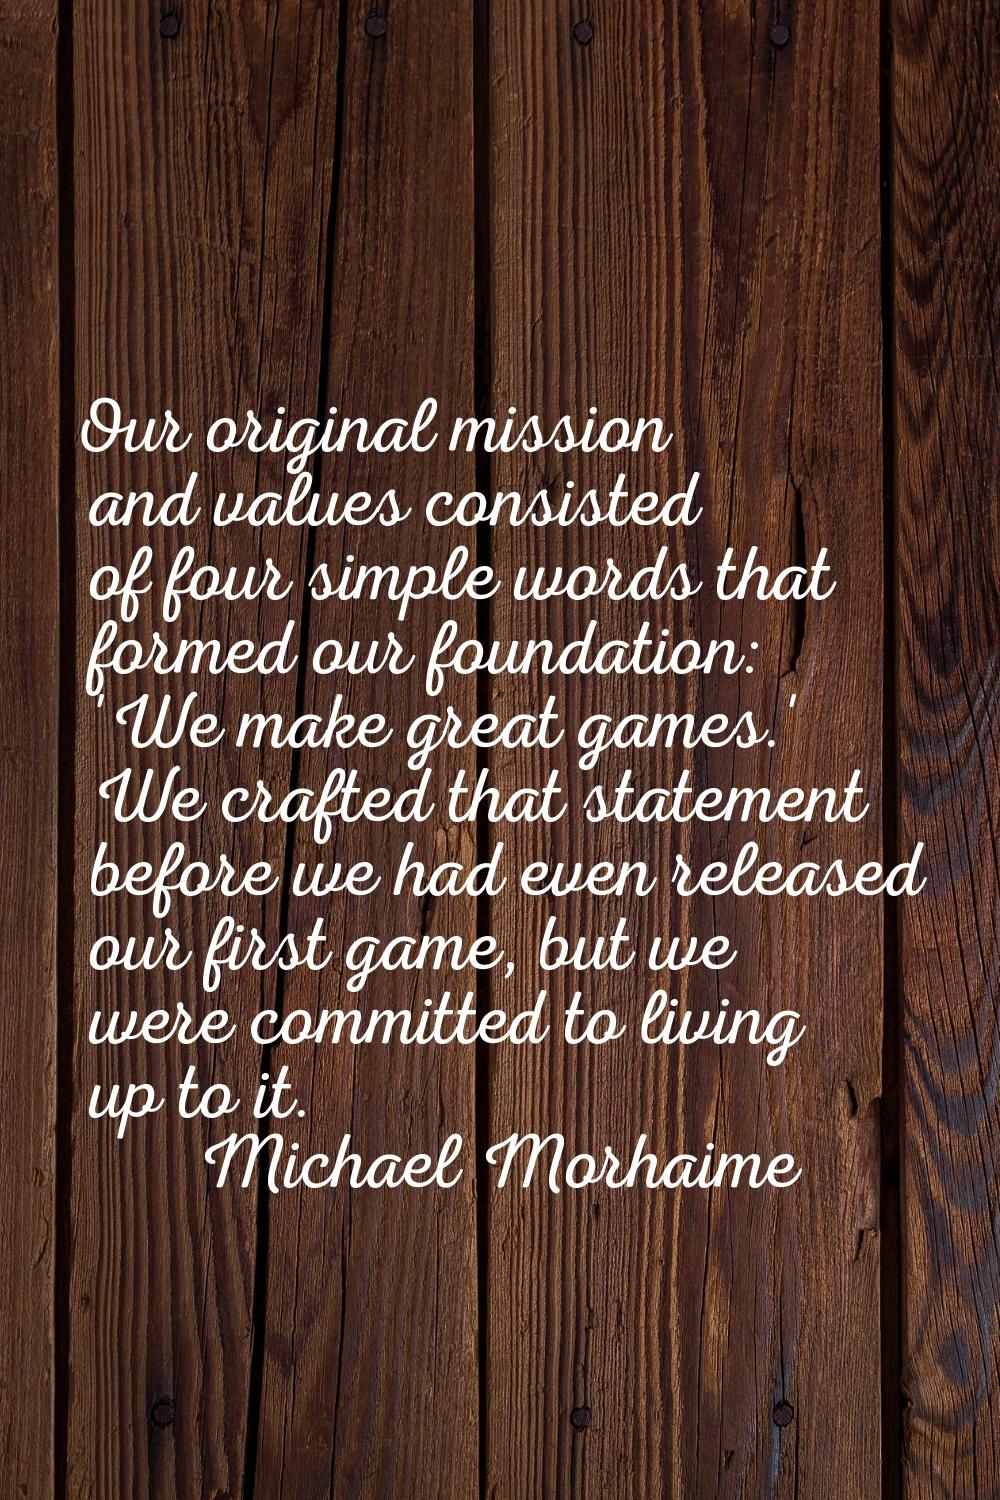 Our original mission and values consisted of four simple words that formed our foundation: 'We make